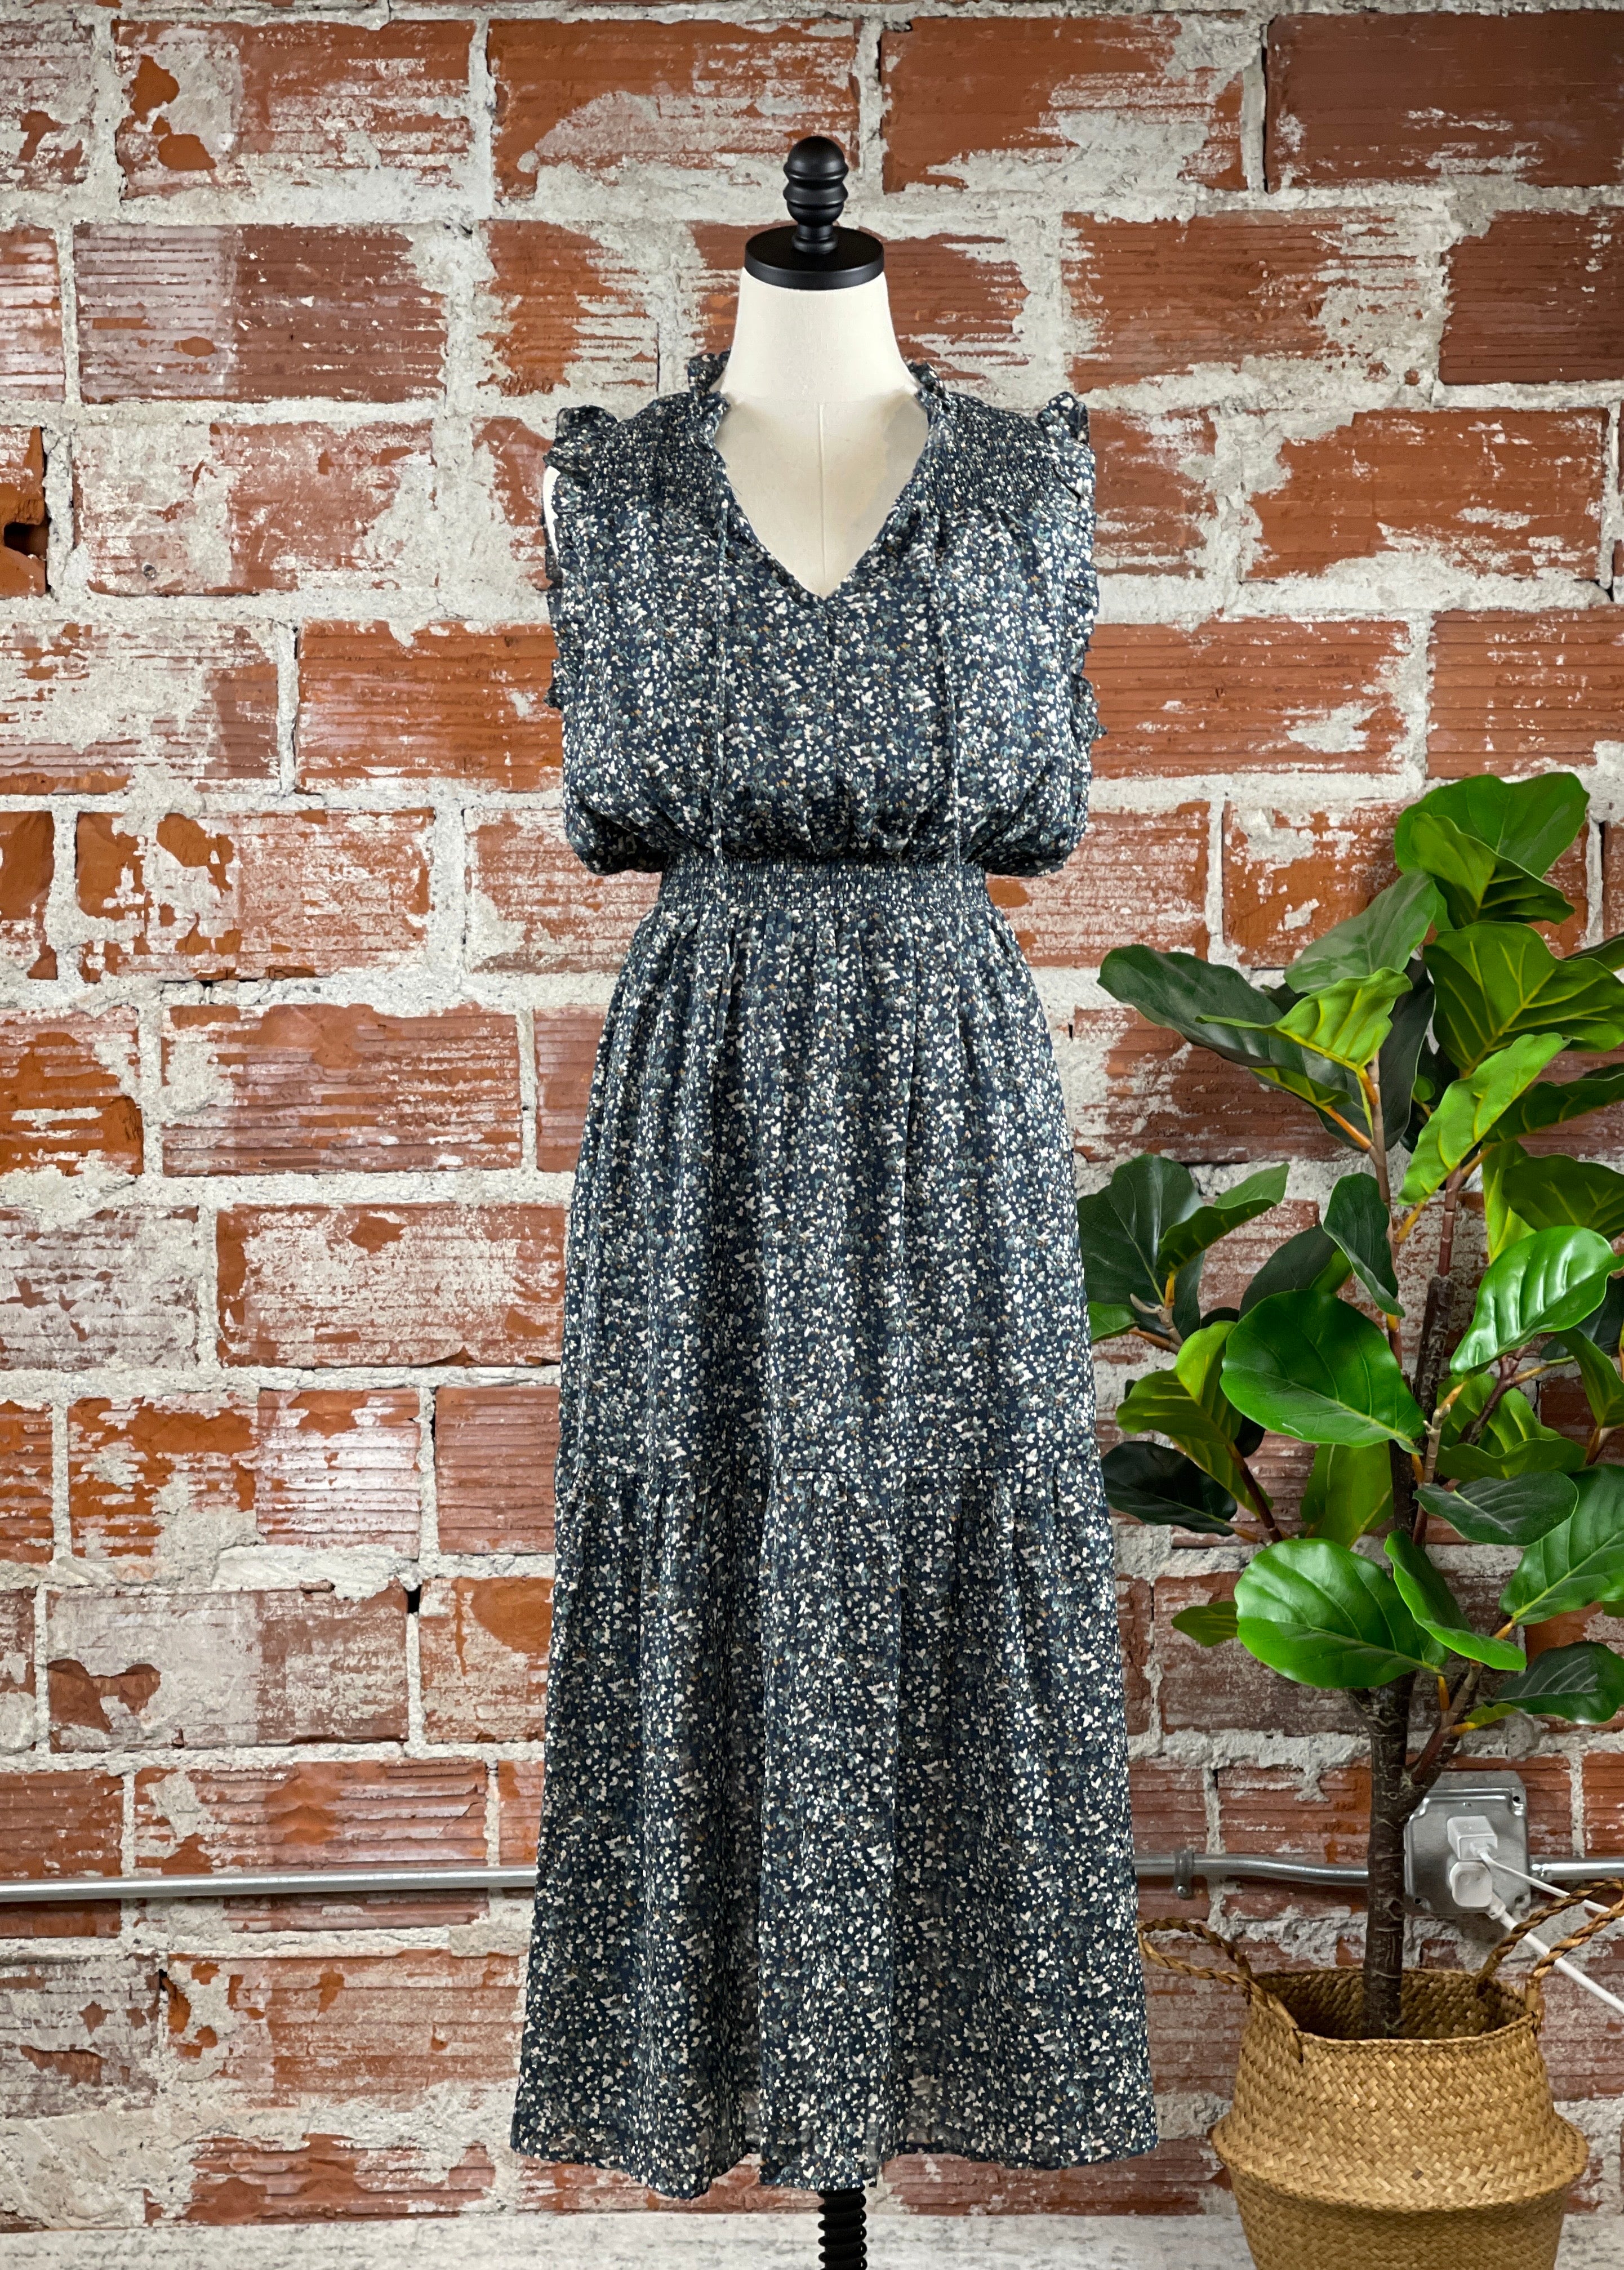 My Everything Dress in Midnight-152 Dresses - Long-Little Bird Boutique